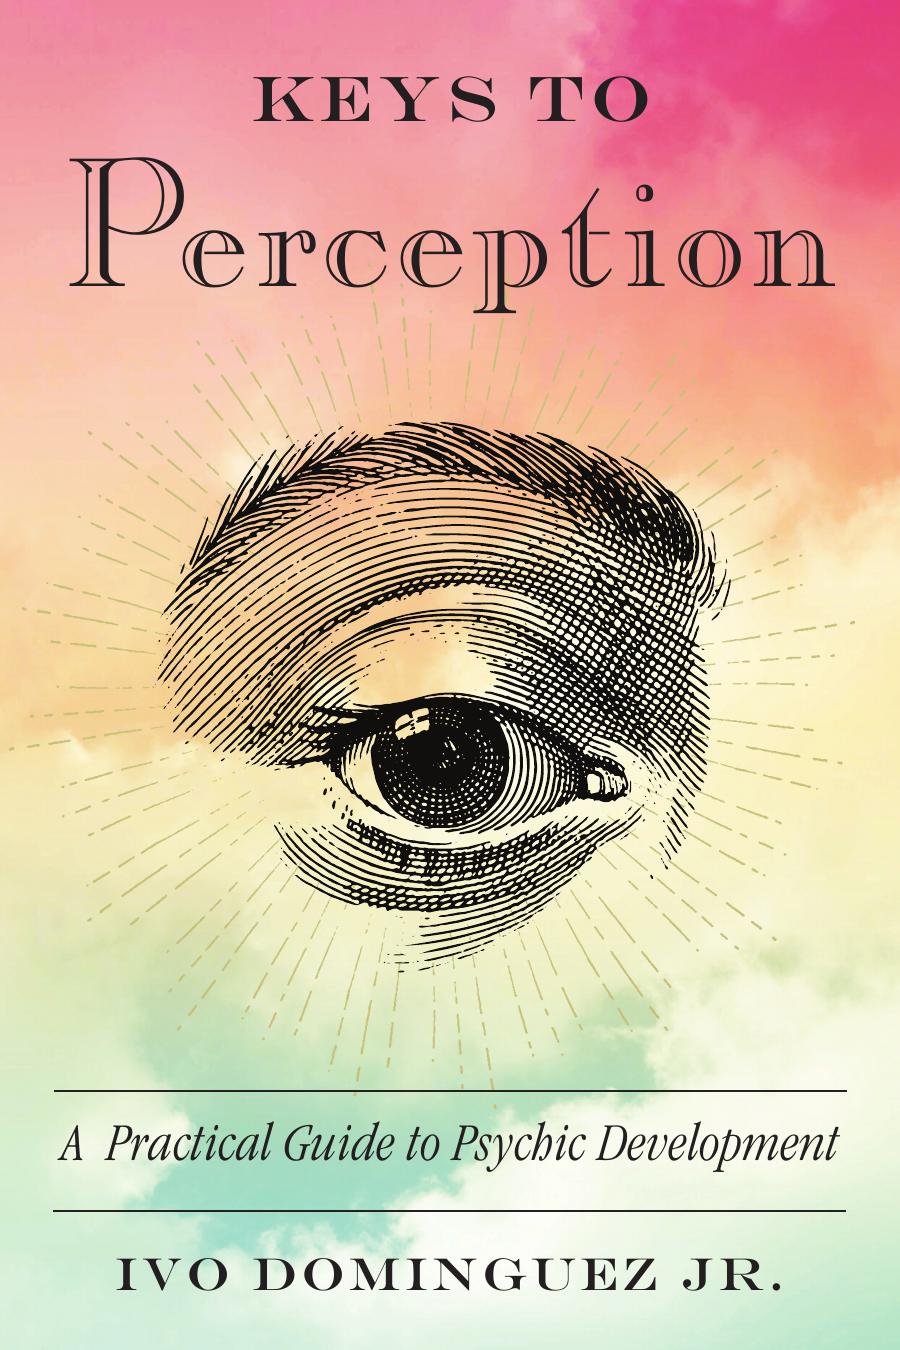 Keys to Perception: A Practical Guide to Psychic Development